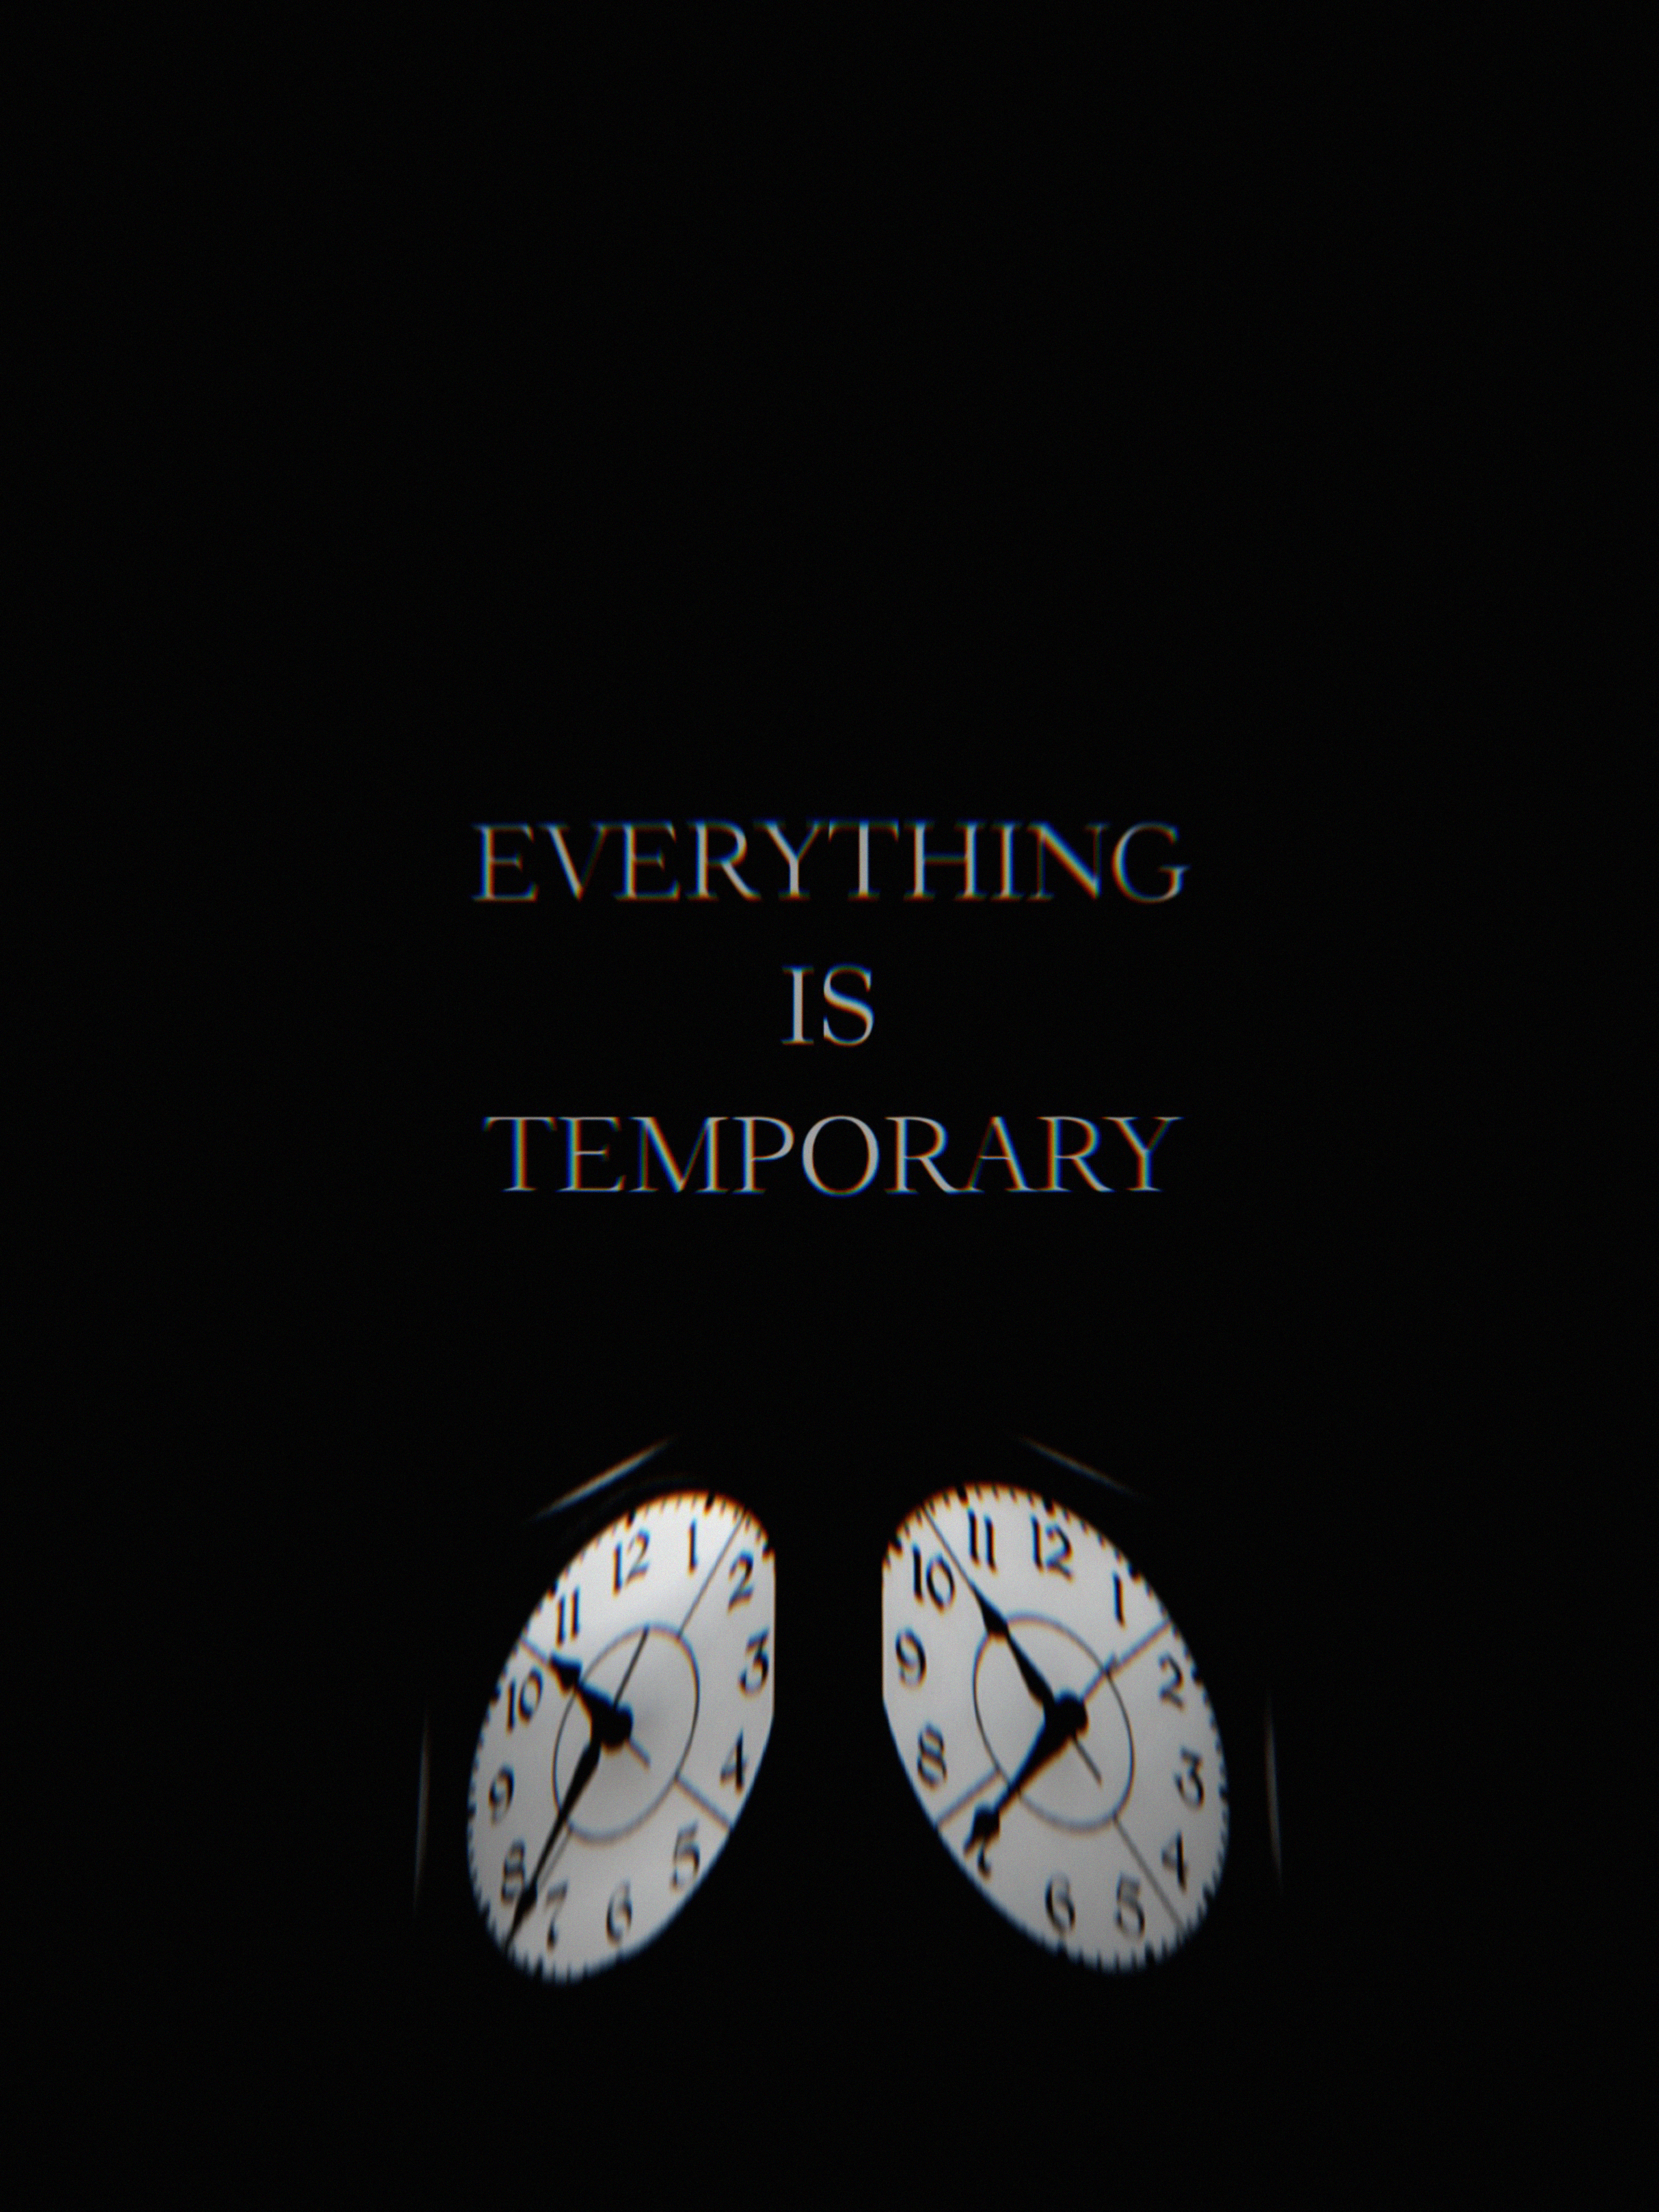 wallpapers life, clock, words, glitch, time, it's time, temporary